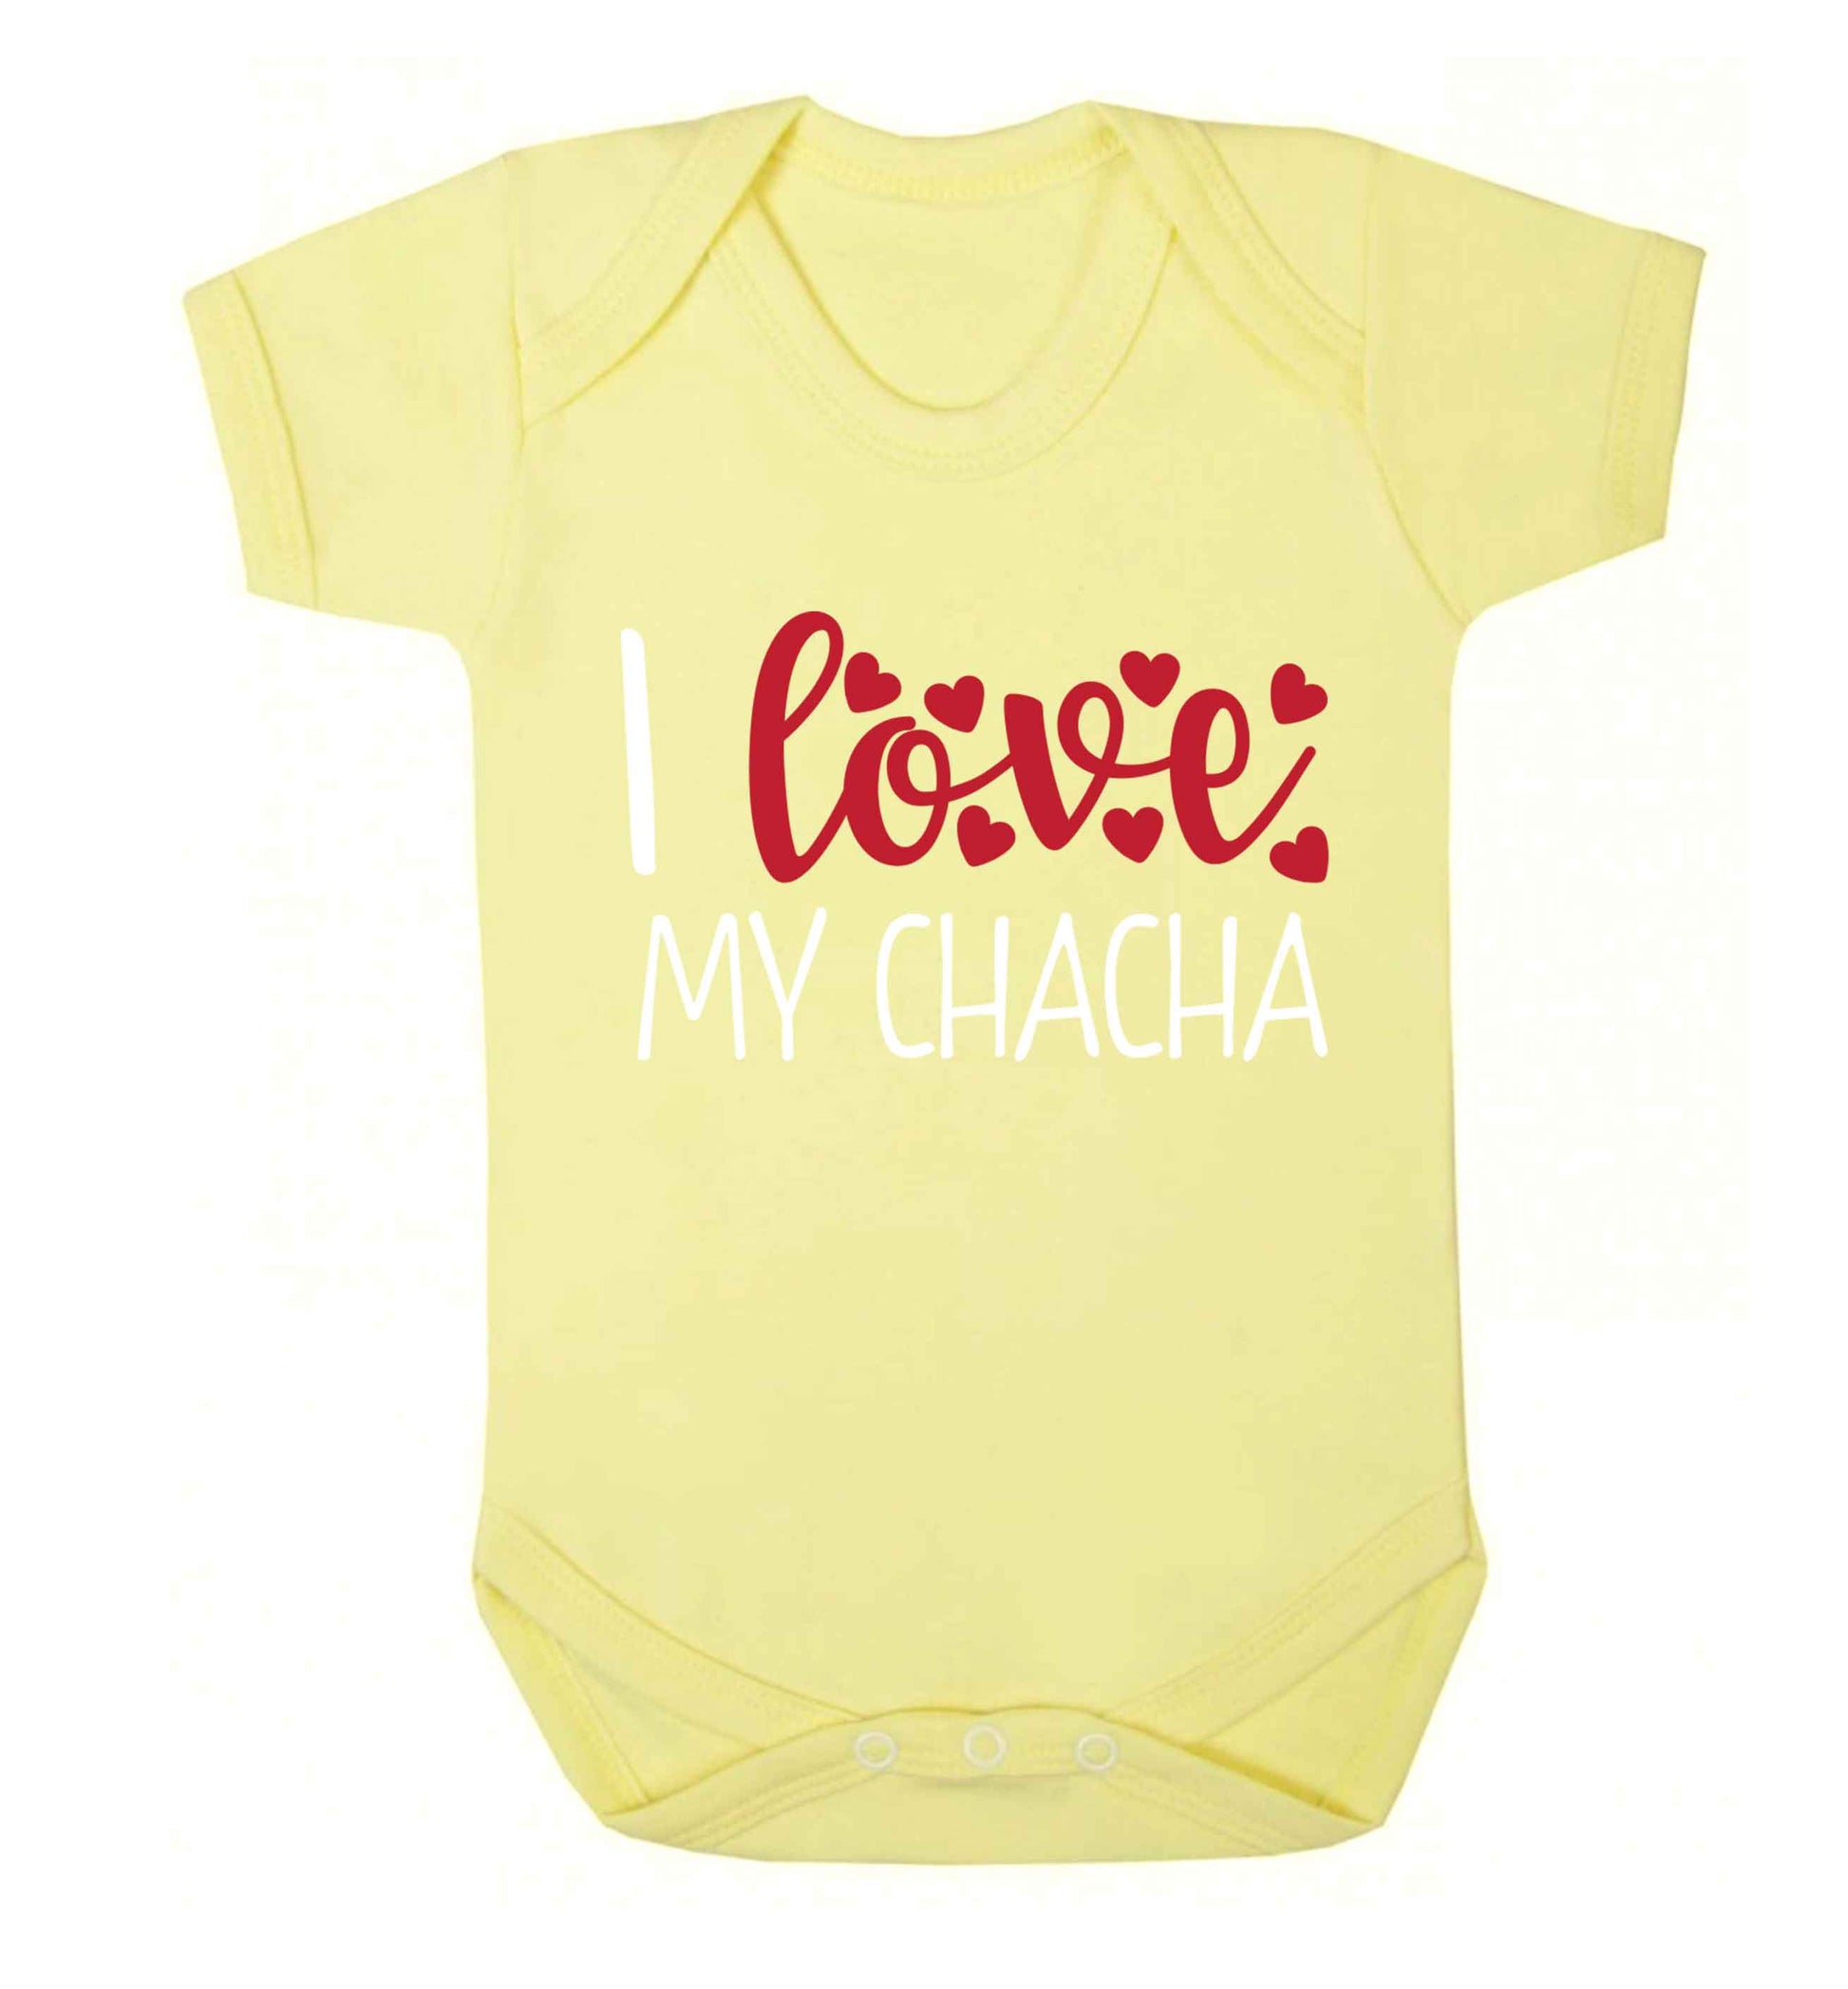 I love my chacha Baby Vest pale yellow 18-24 months